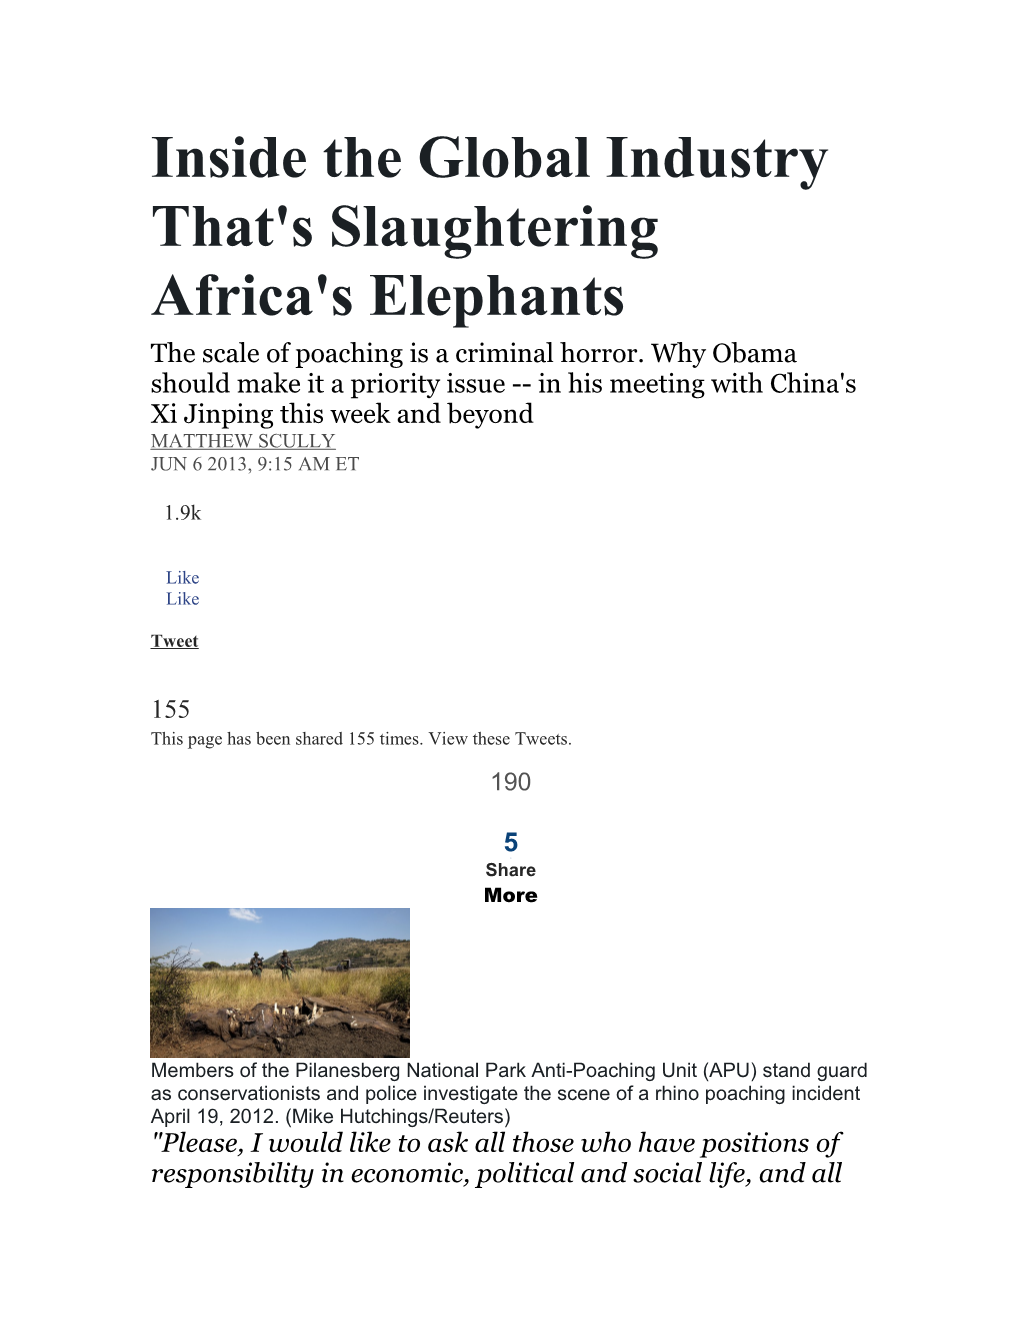 Inside the Global Industry That's Slaughtering Africa's Elephants